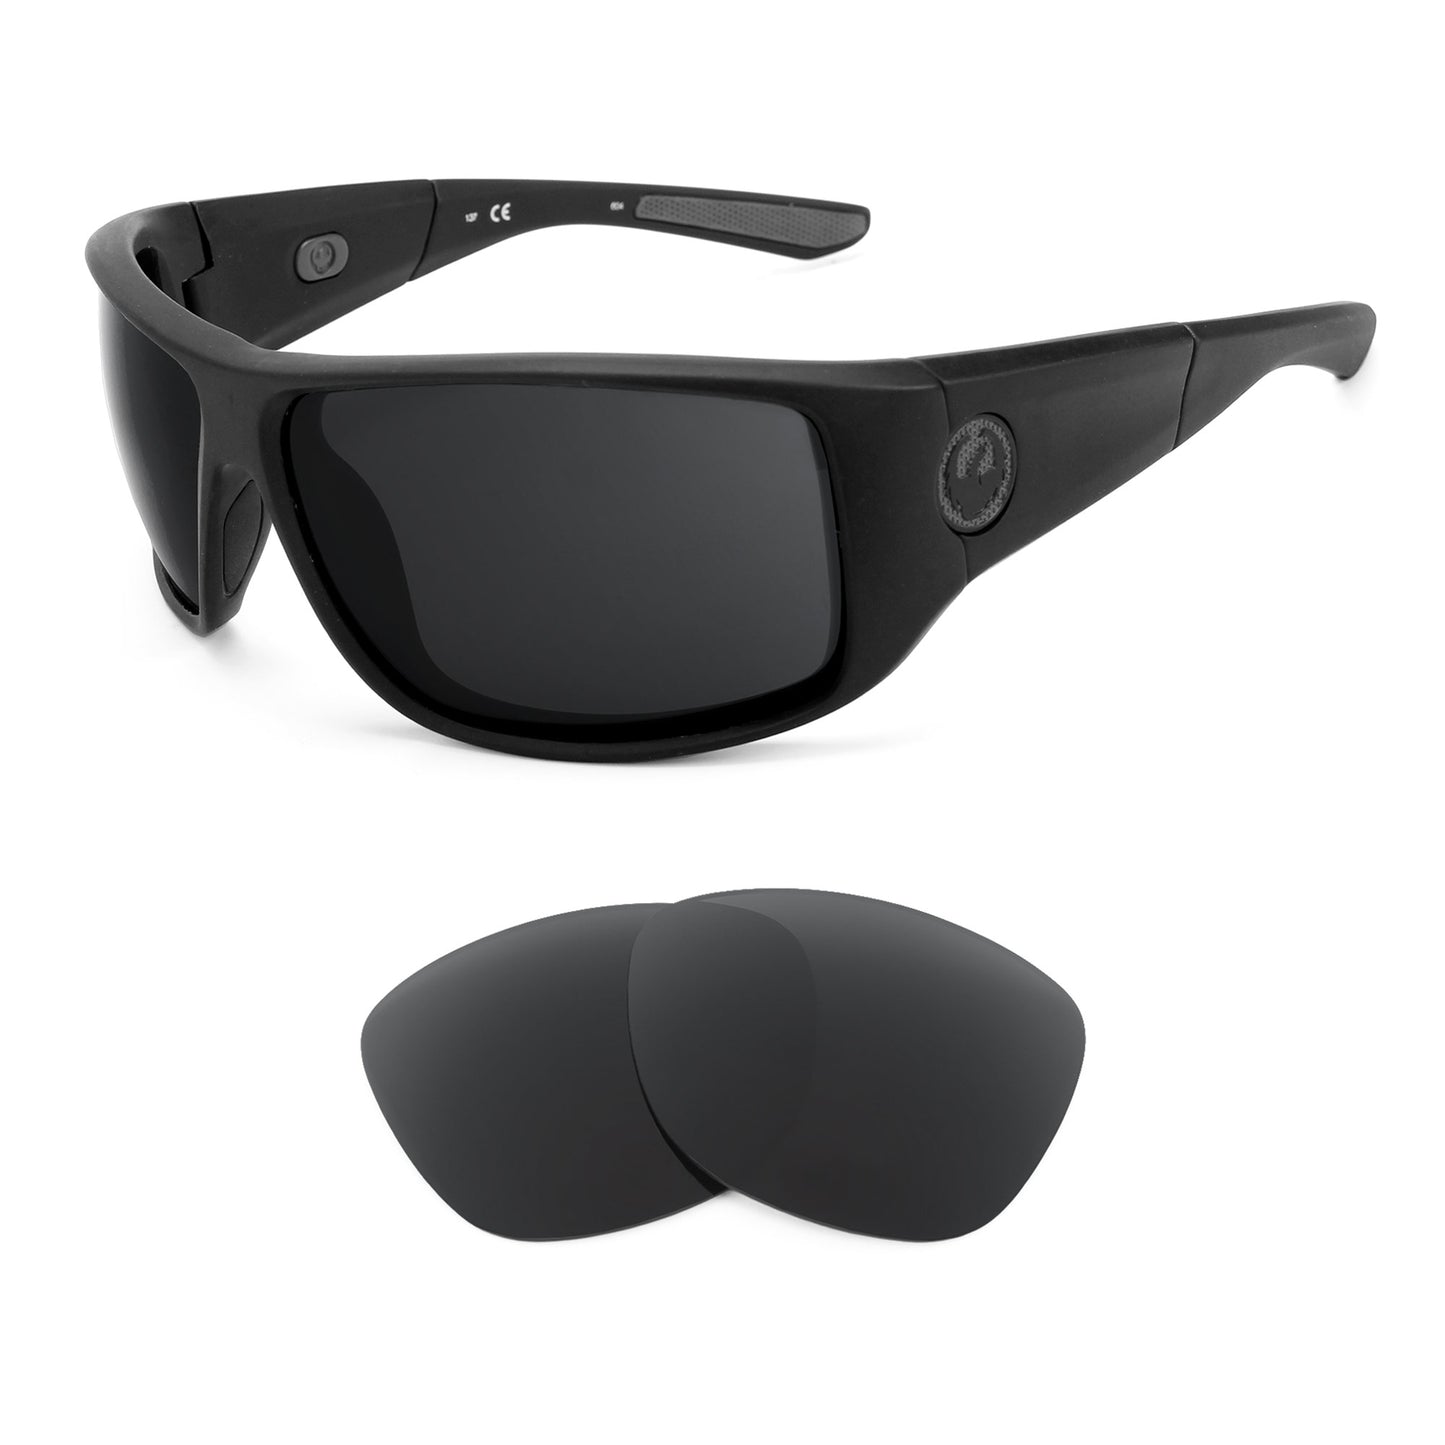 Dragon WatermanX sunglasses with replacement lenses